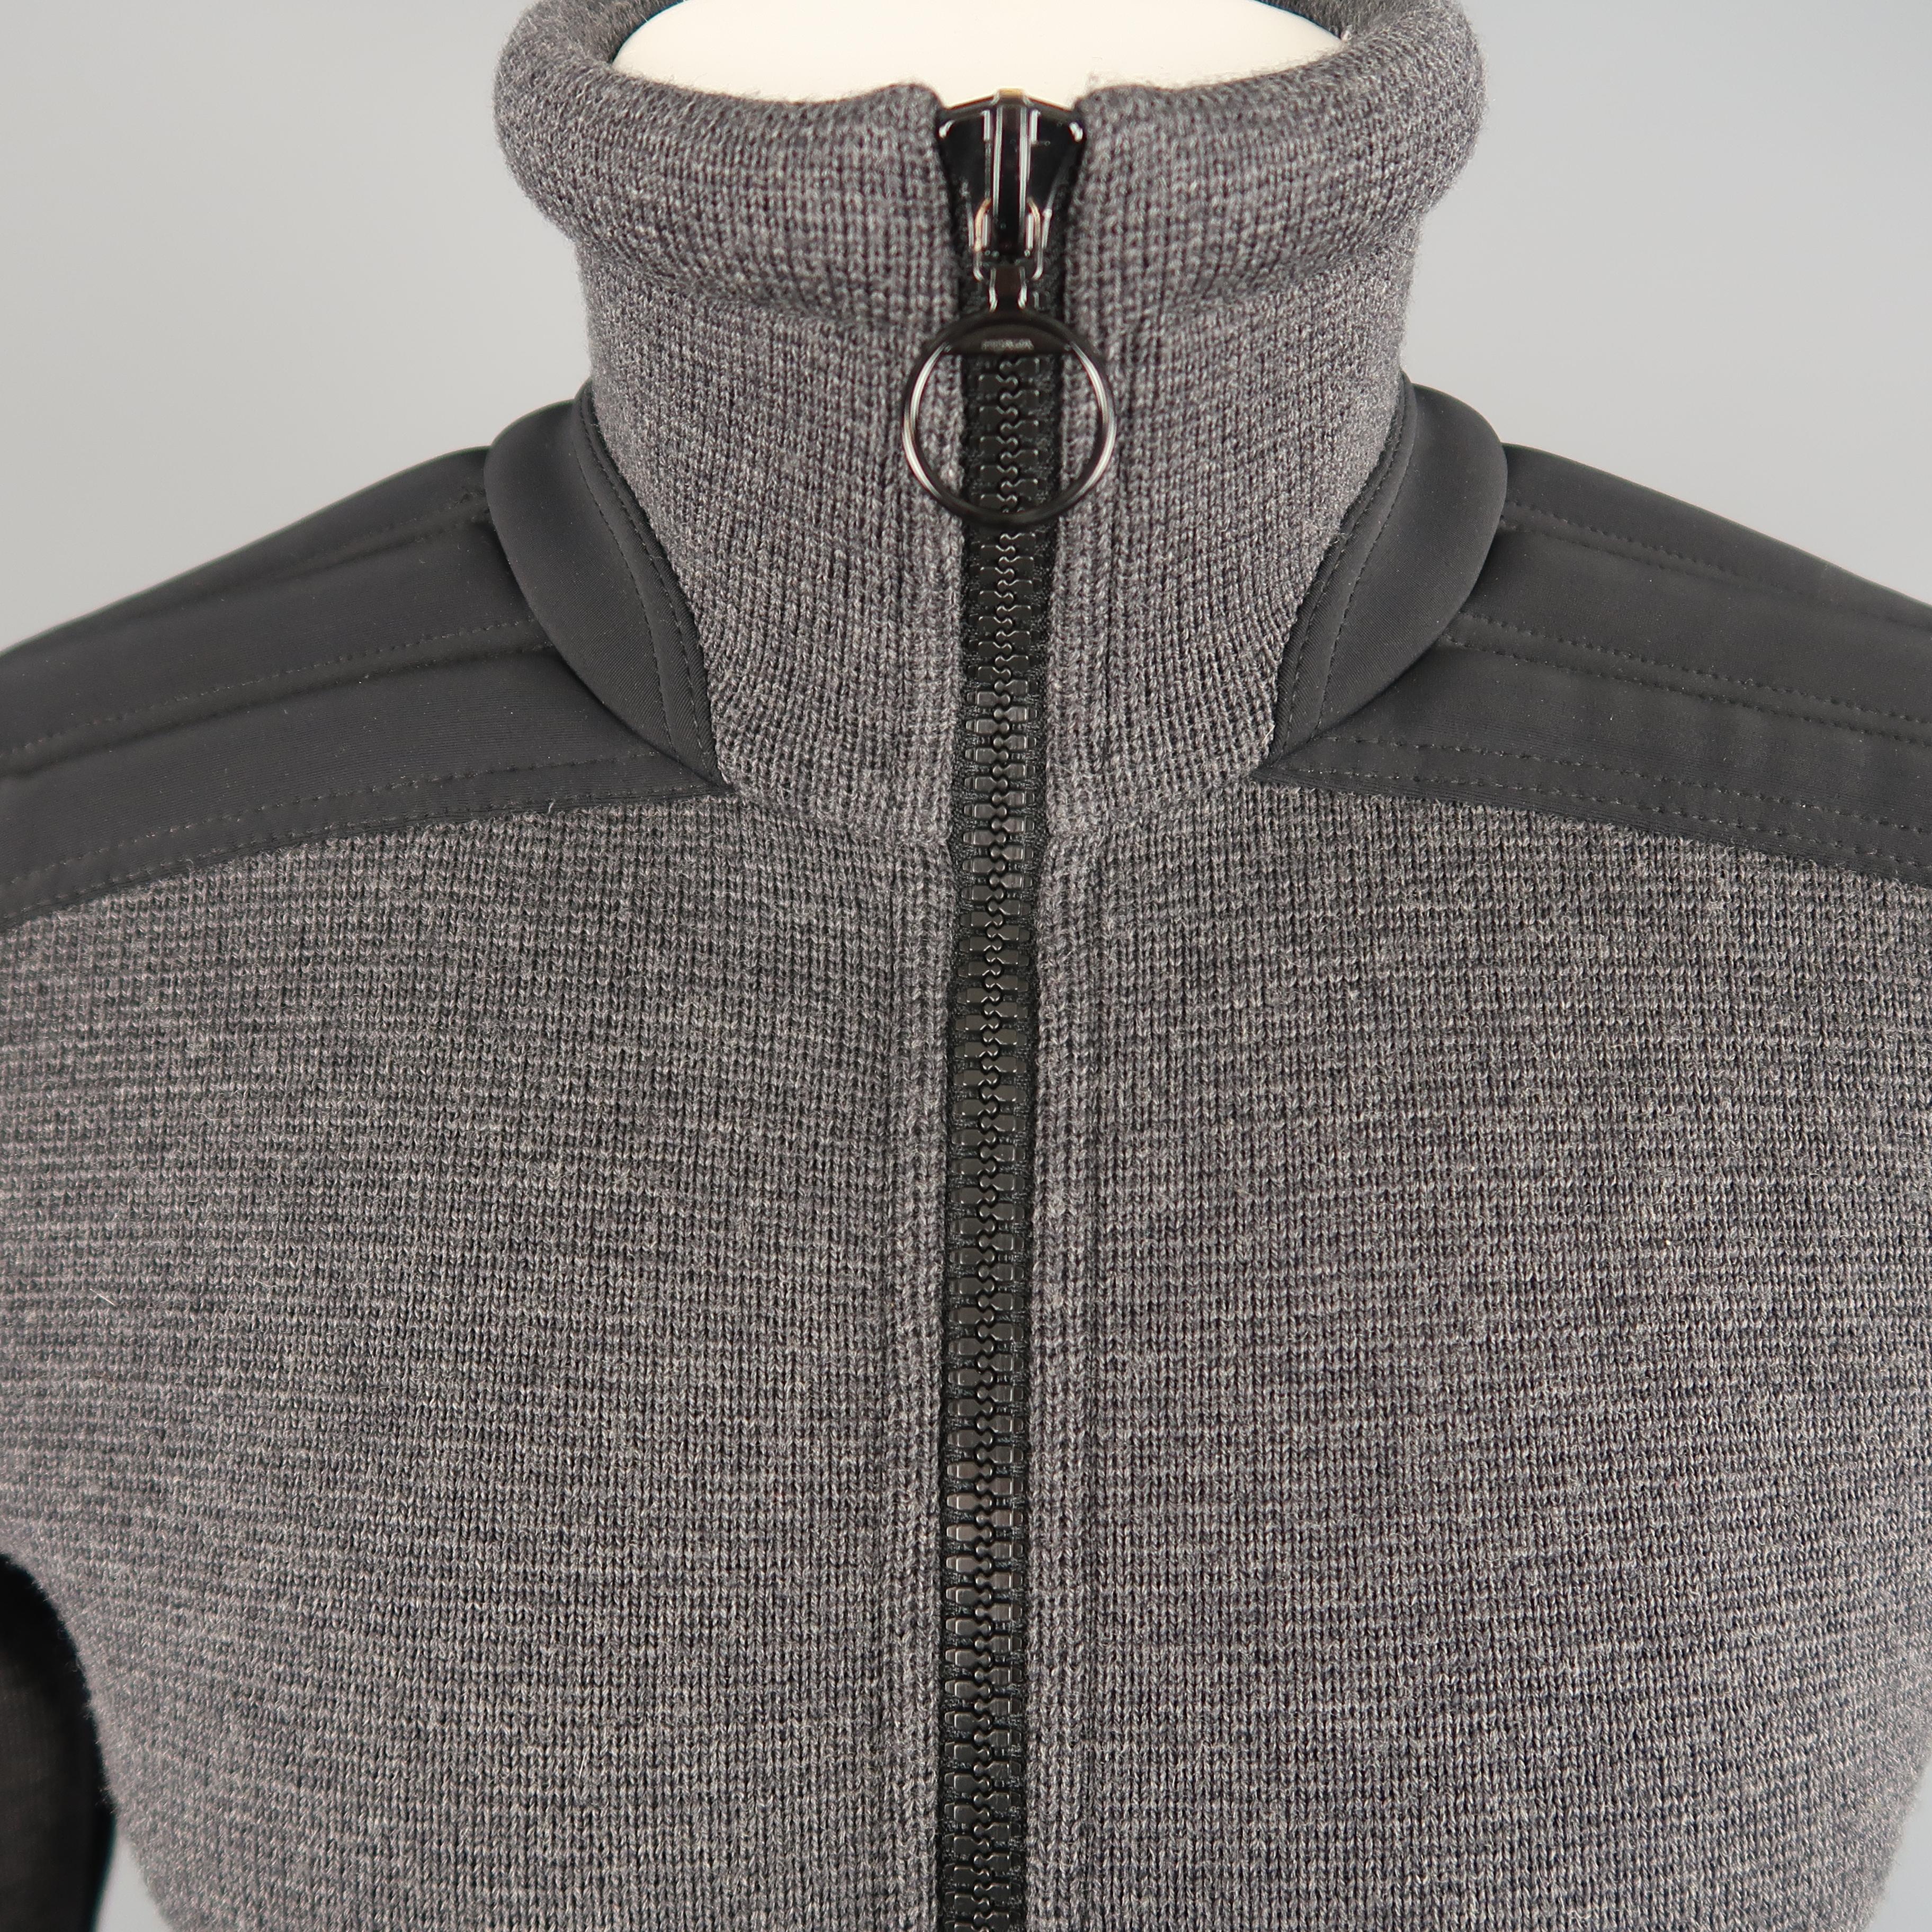 PRADA jacket comes in gray wool knit with a high collar, double zip front, and padded nylon moto detailed sleeves. Hole on back. As-is.
 
Good Pre-Owned Condition.
Marked: IT 48
 
Measurements:
 
Shoulder: 16 in.
Chest: 39 in.
Sleeve: 25 in.
Length: